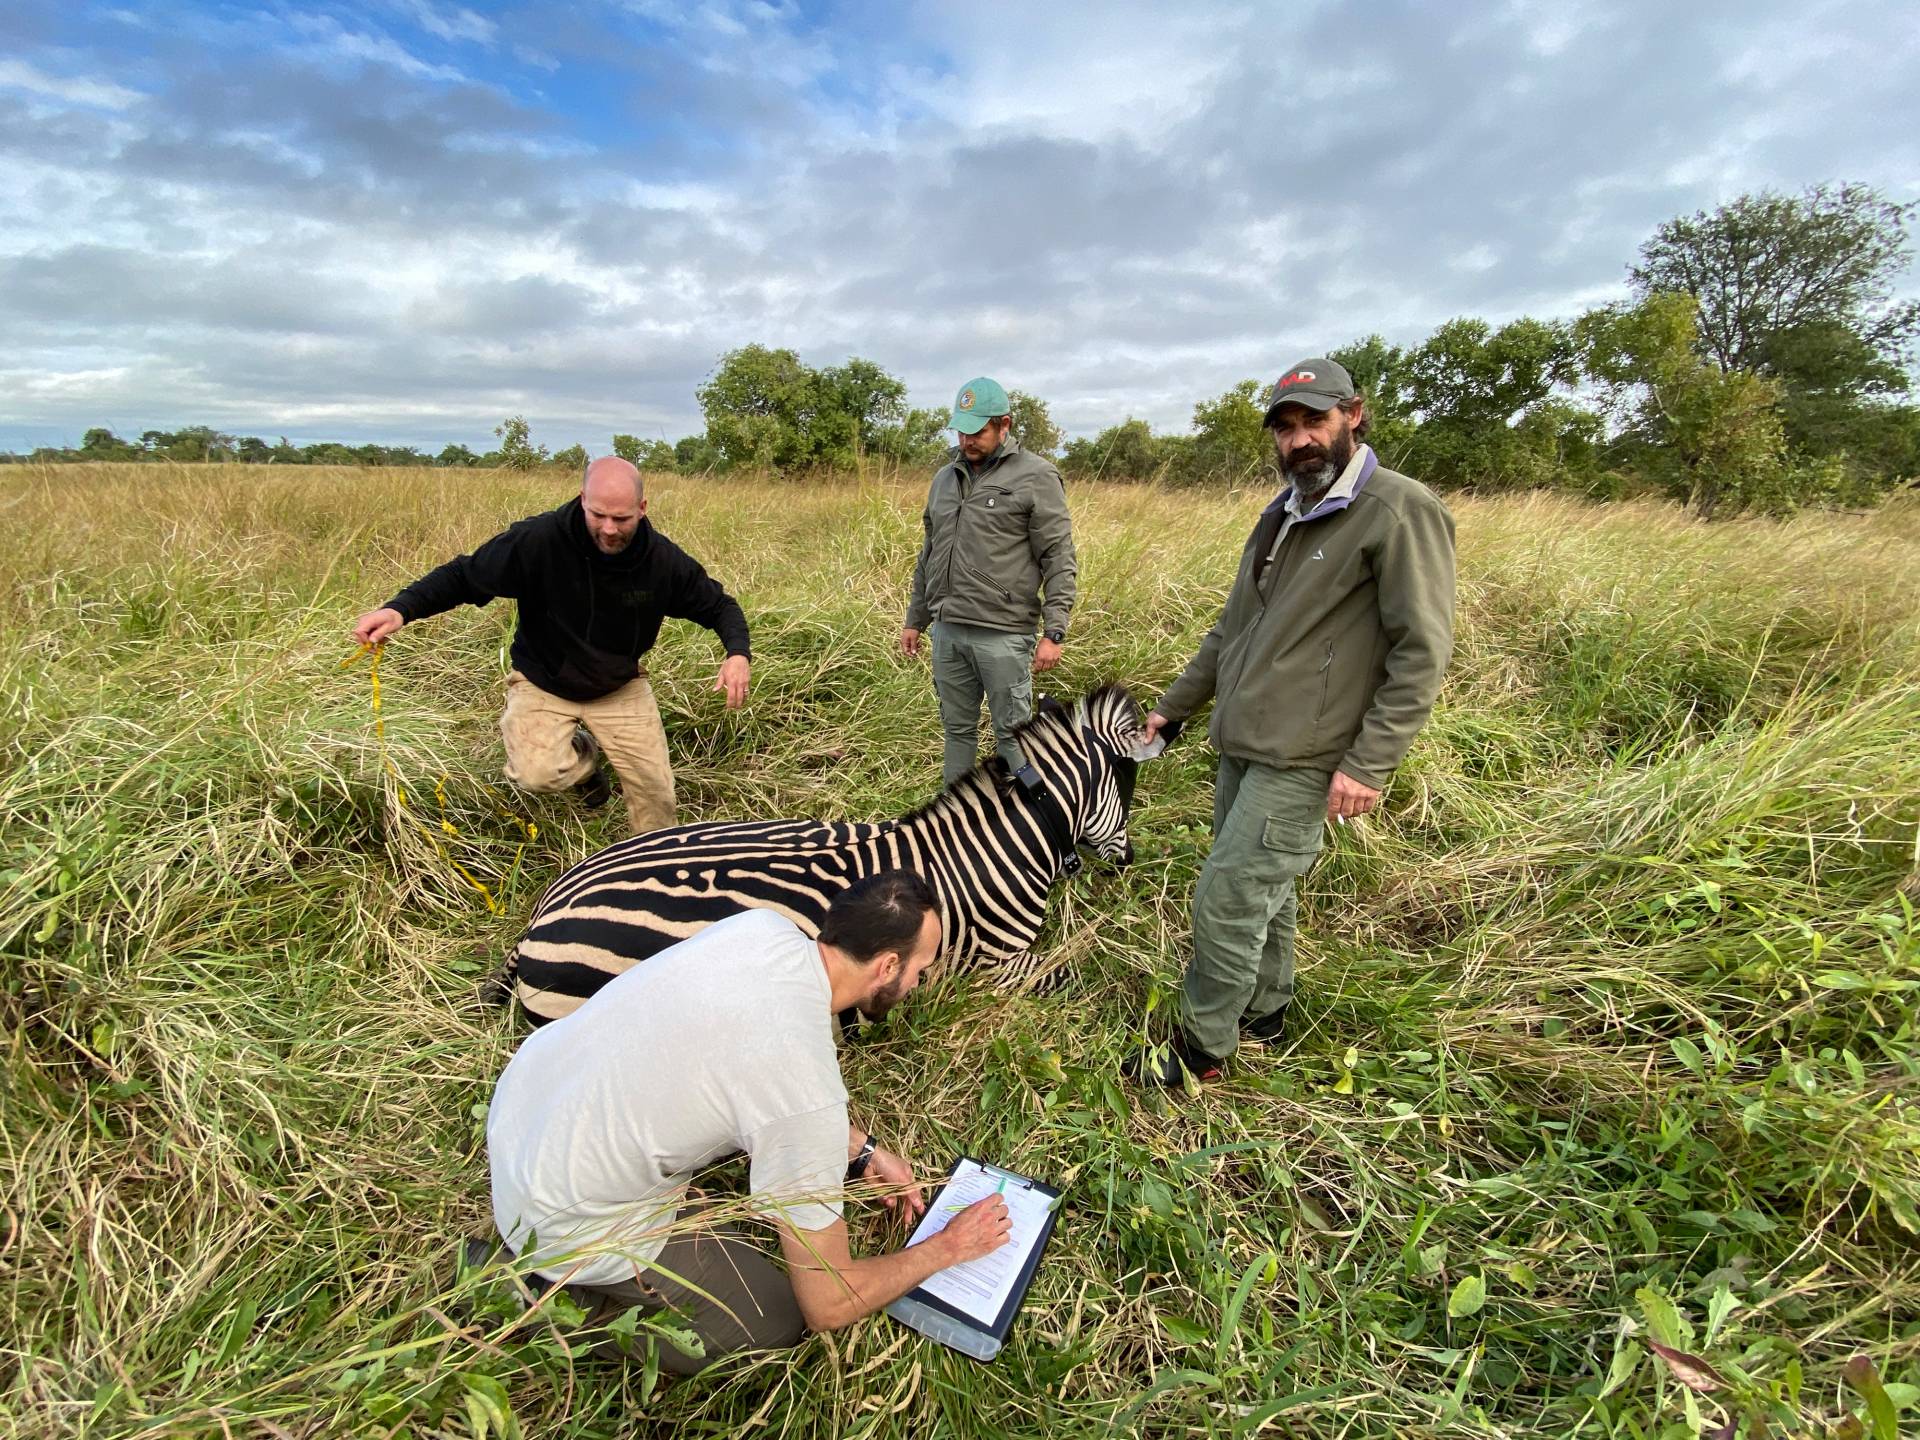 Researchers monitor the health of a GPS-collared zebra. From left: Jeremy Van Driessche, a Ph.D. student at the University of Idaho (who is writing down data); Ryan Long (wearing a black sweatshirt), a former Princeton postdoctoral fellow who is now a professor at the University of Idaho, measuring the zebra; Harry Hensburg (wearing a green hat), wildlife helicopter pilot; and Louis van Wyk, a game-capture specialist.